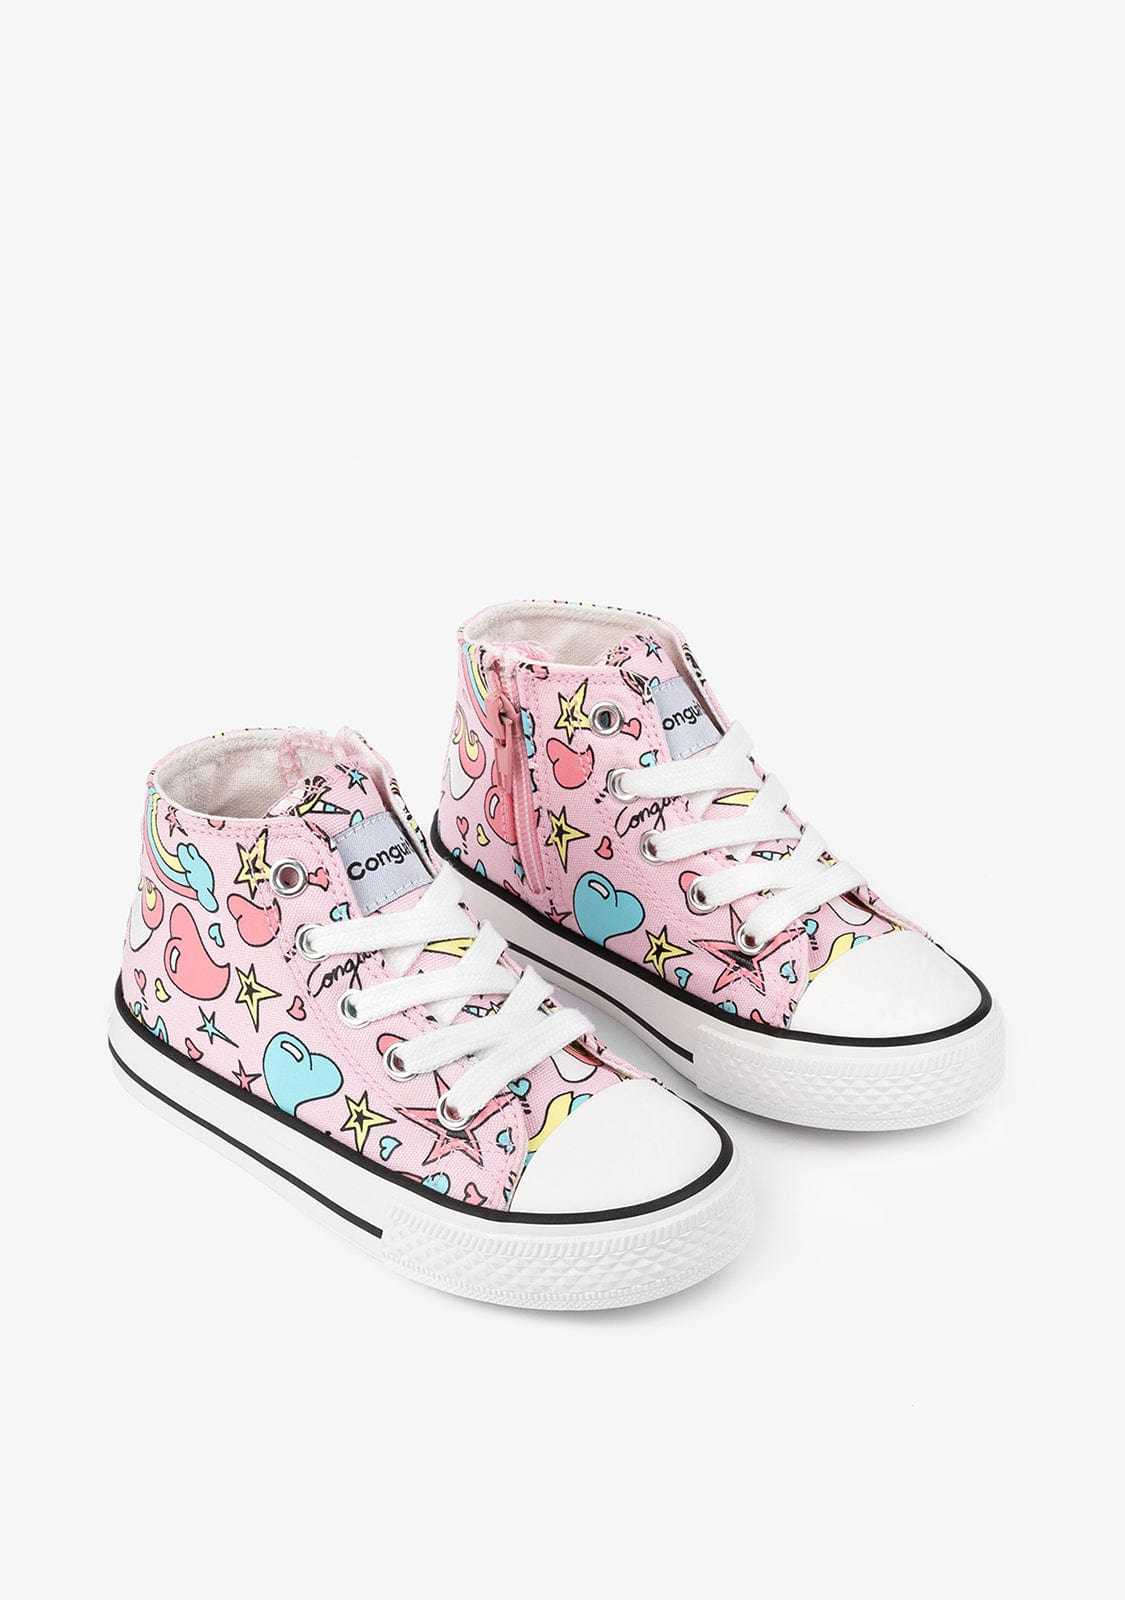 CONGUITOS Shoes Girl's Pink Unicorn Hi-Top Sneakers